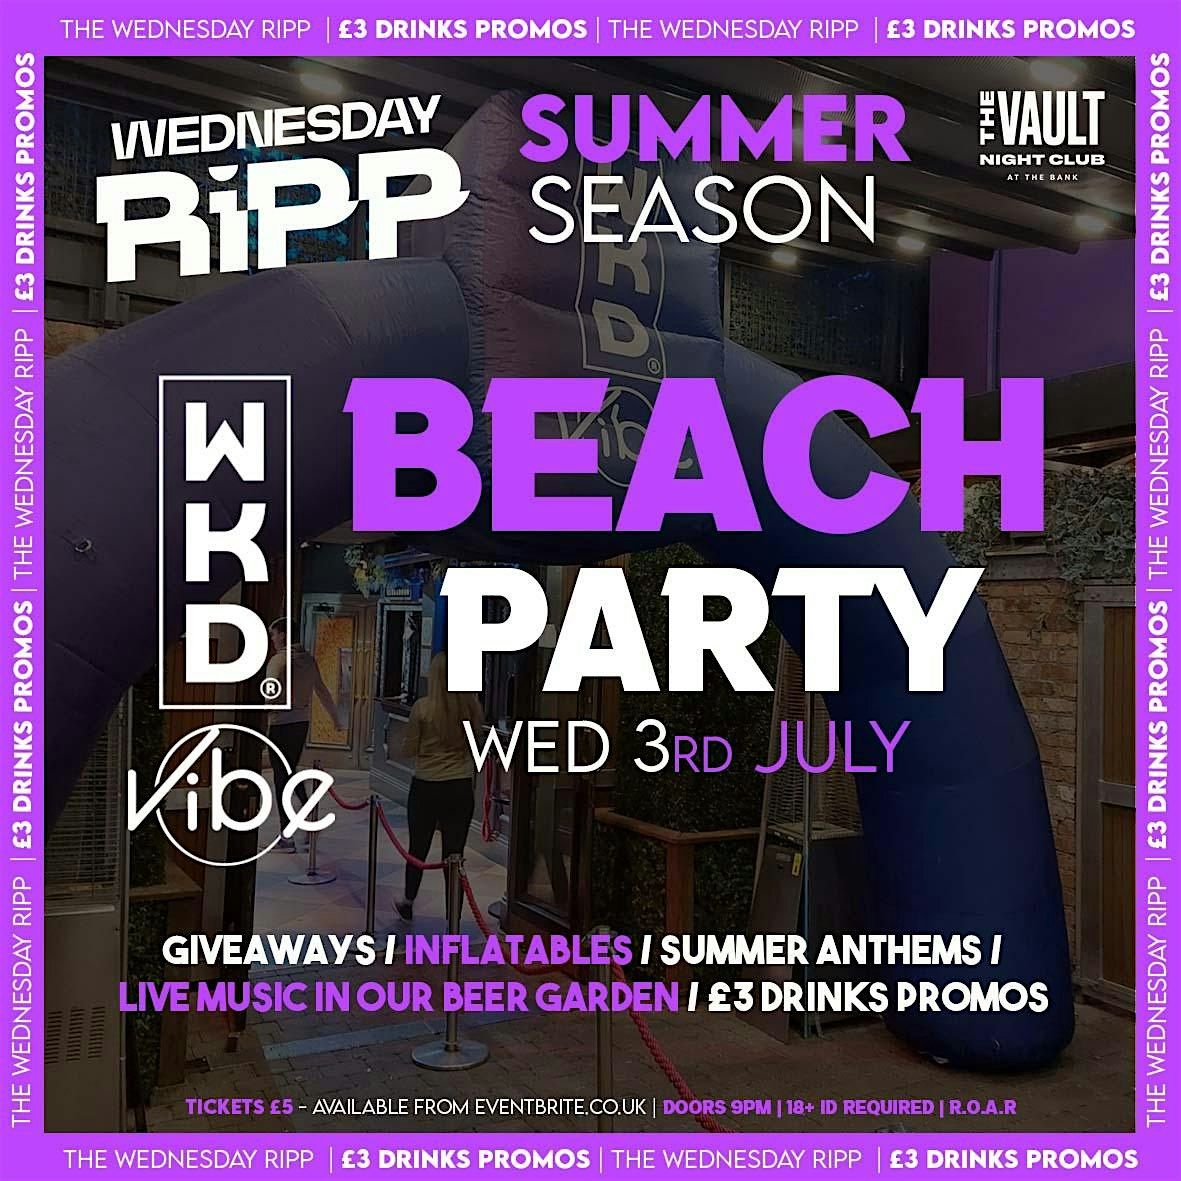 WEDNESDAY RIPP | WKD VIBES BEACK PARTY | WED 3rd JULY